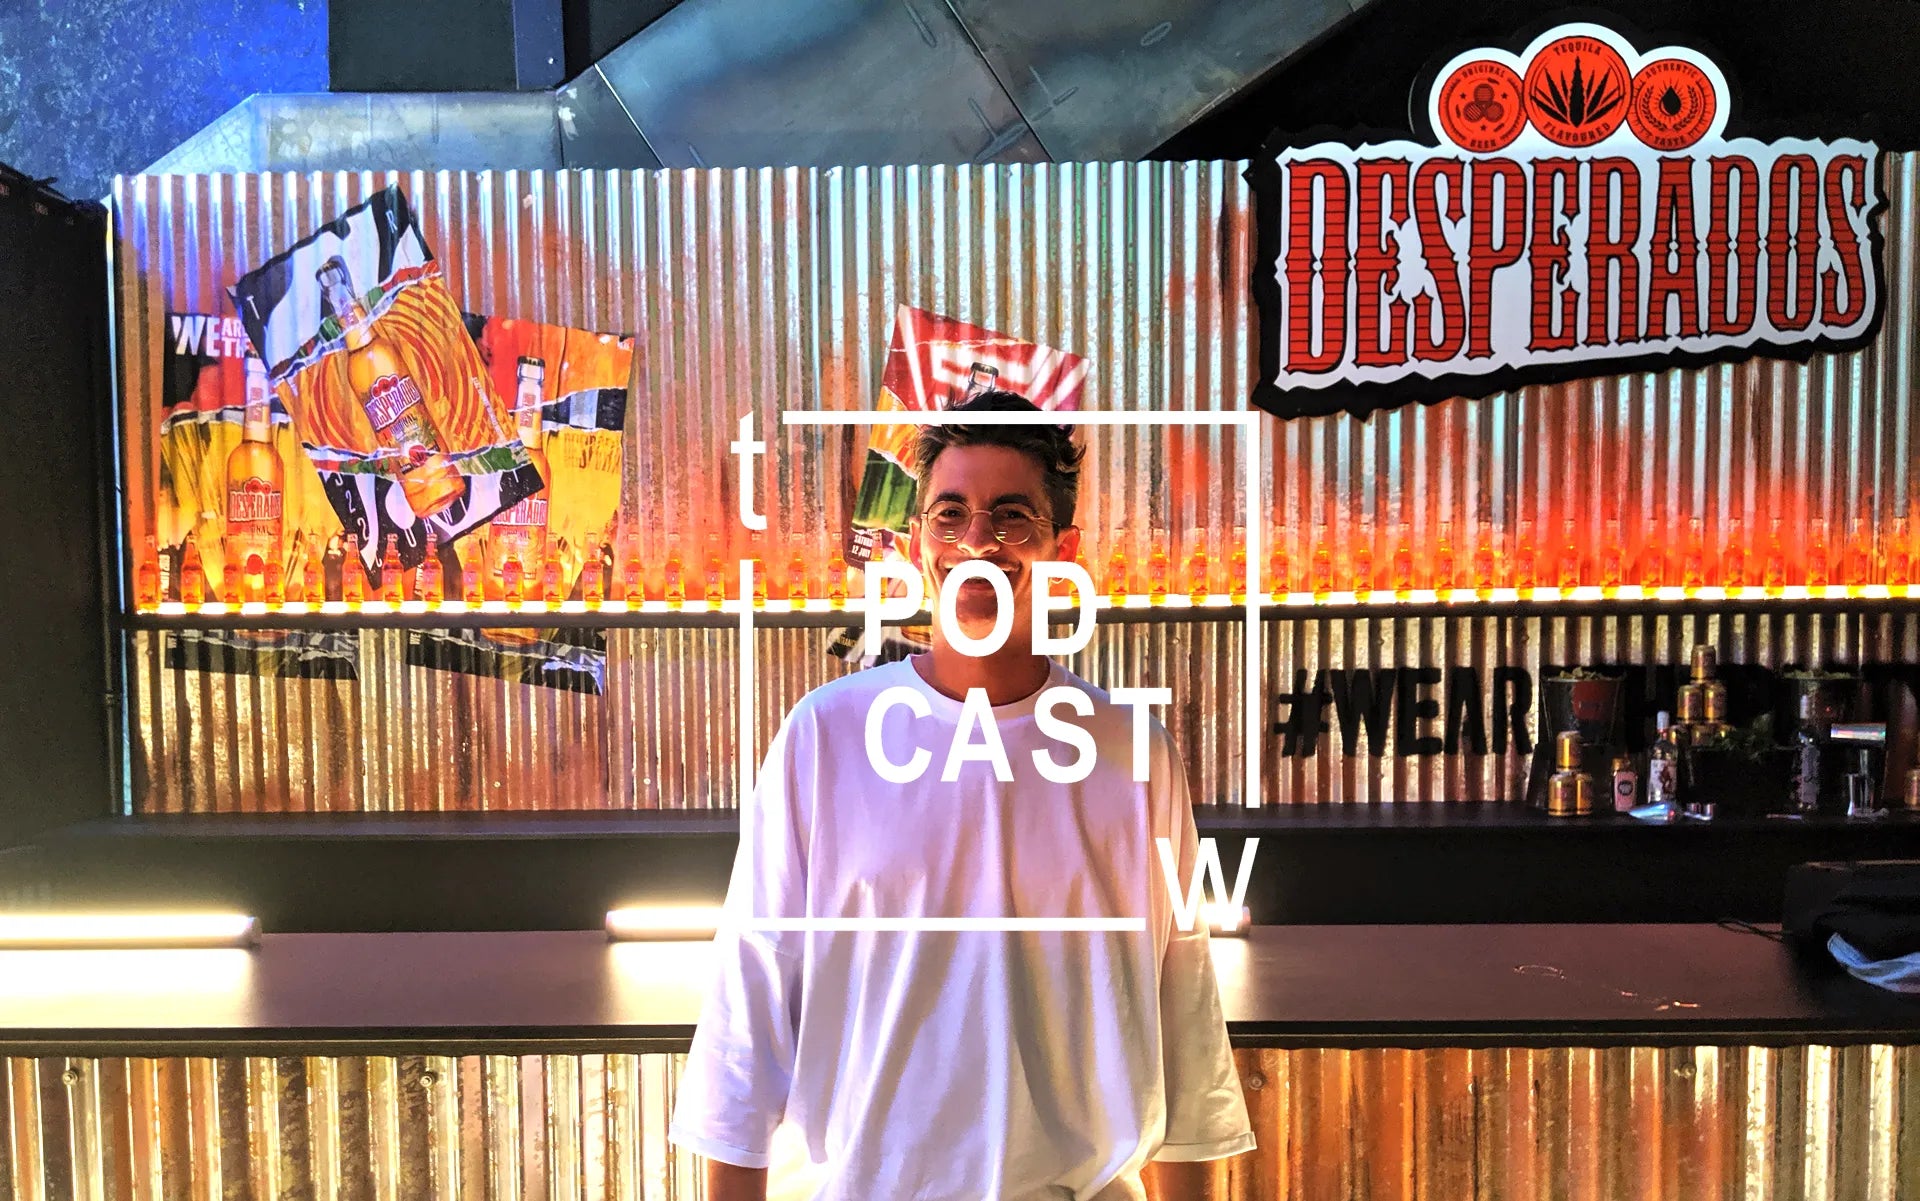 Interview w/ DJ Skream about the ‘Epic House Party’ in London